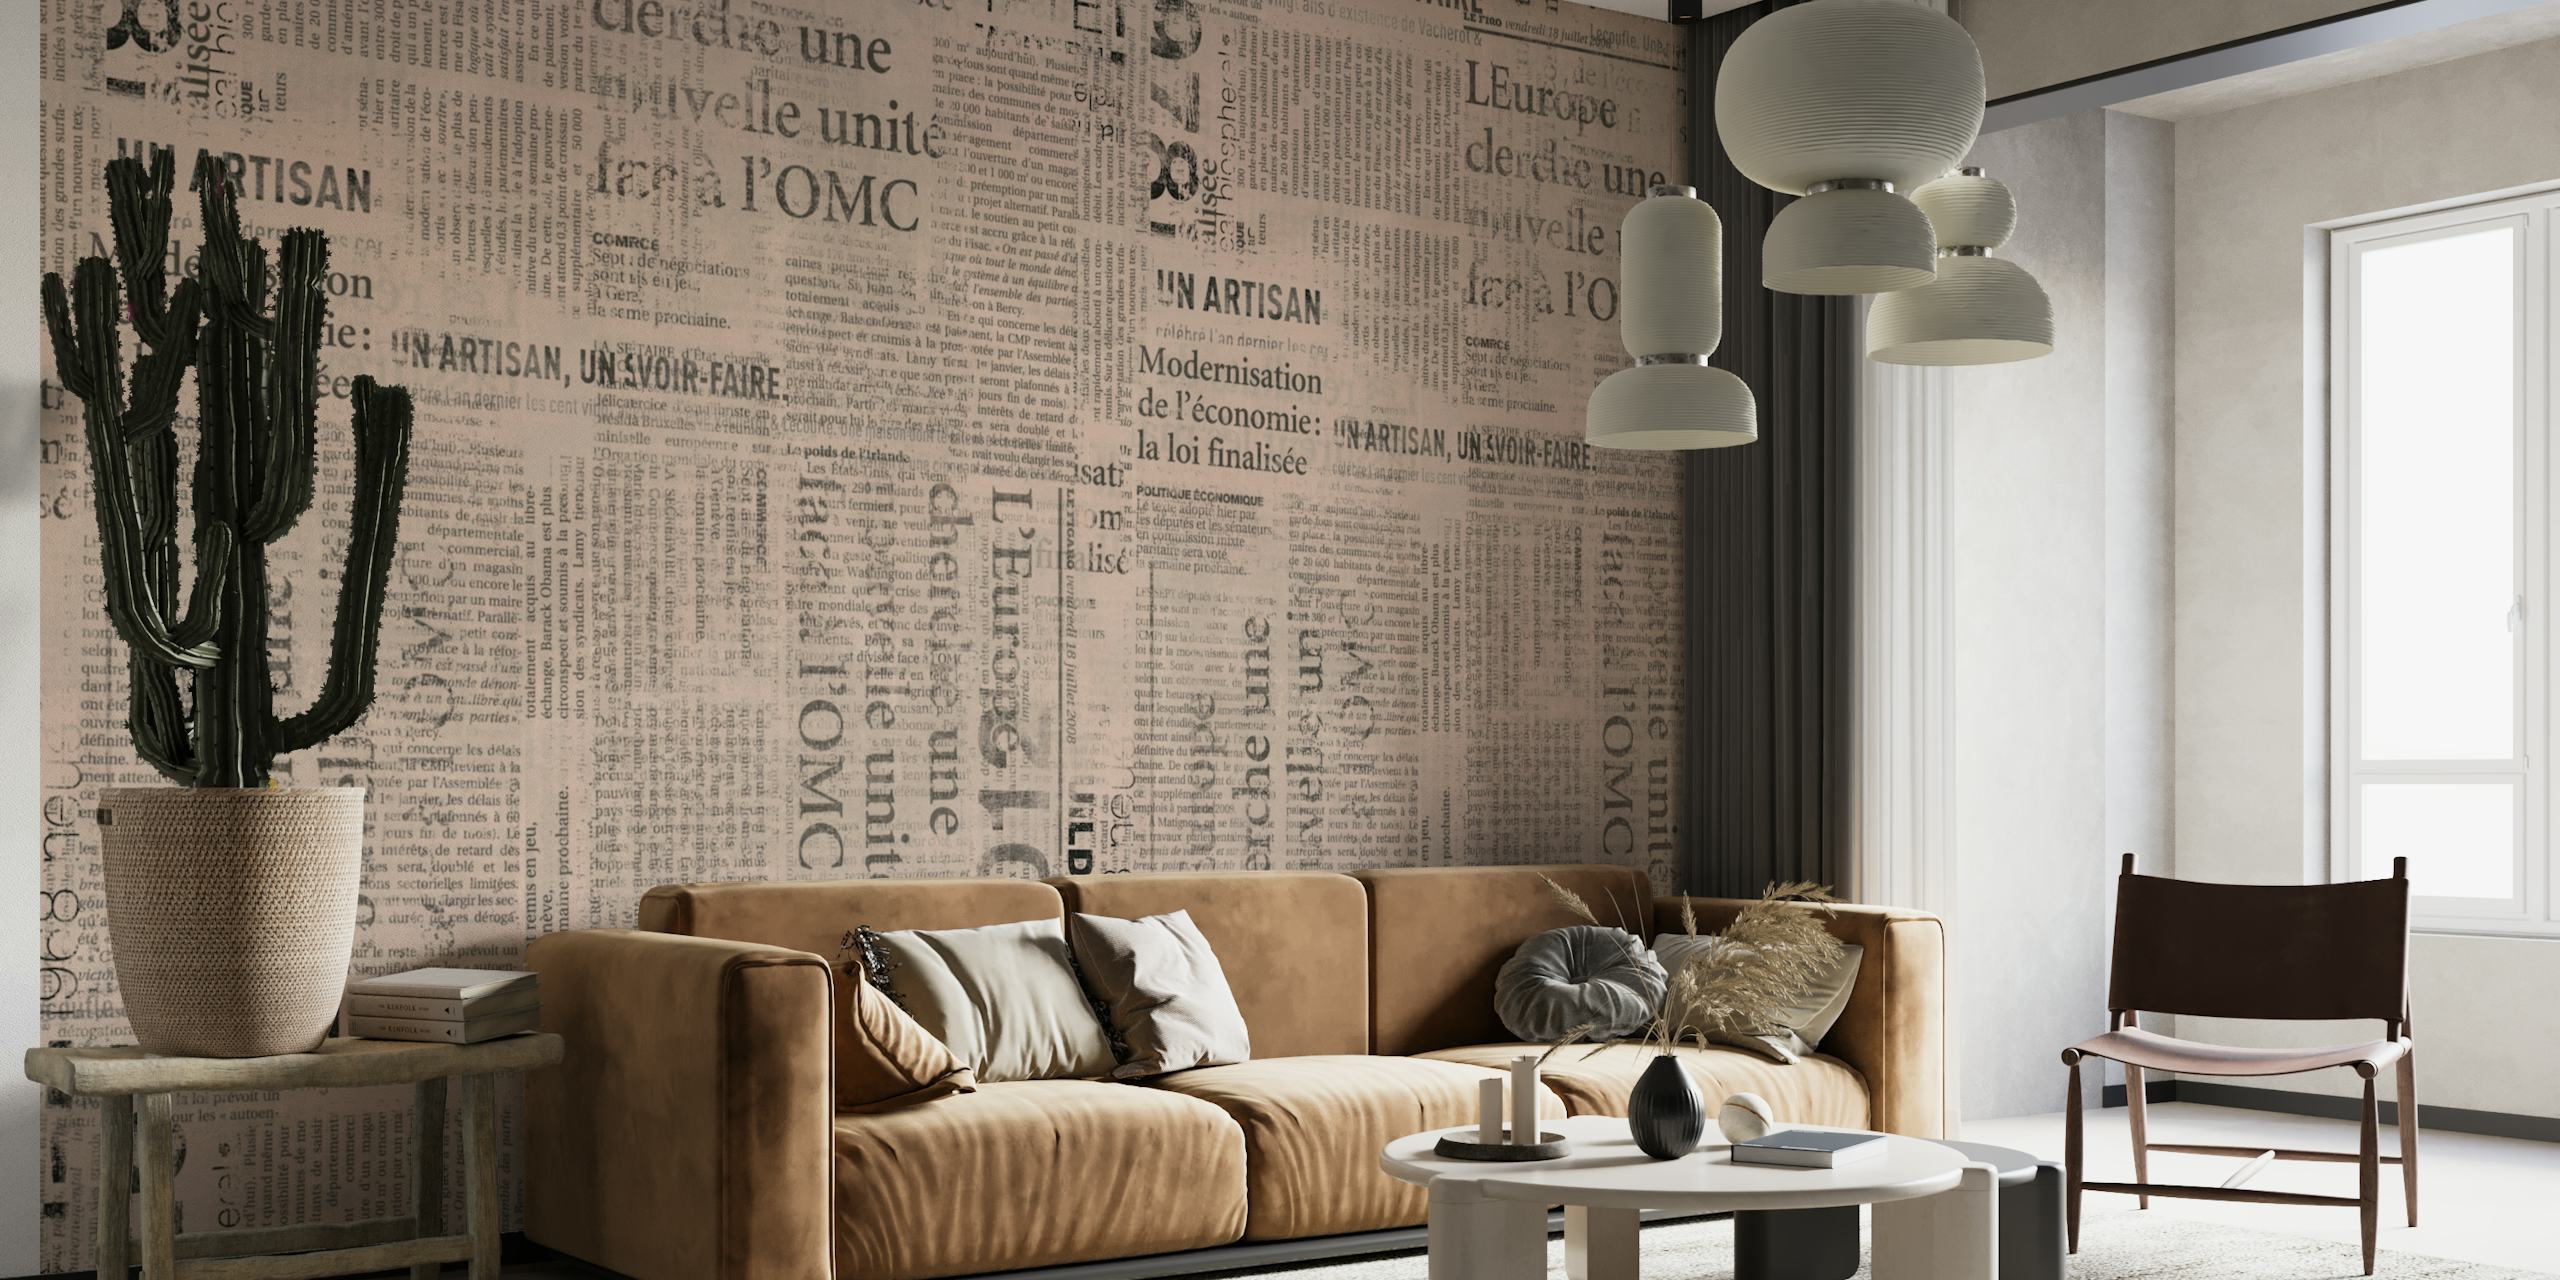 Vintage newspaper collage wall mural for a timeless interior decor statement.